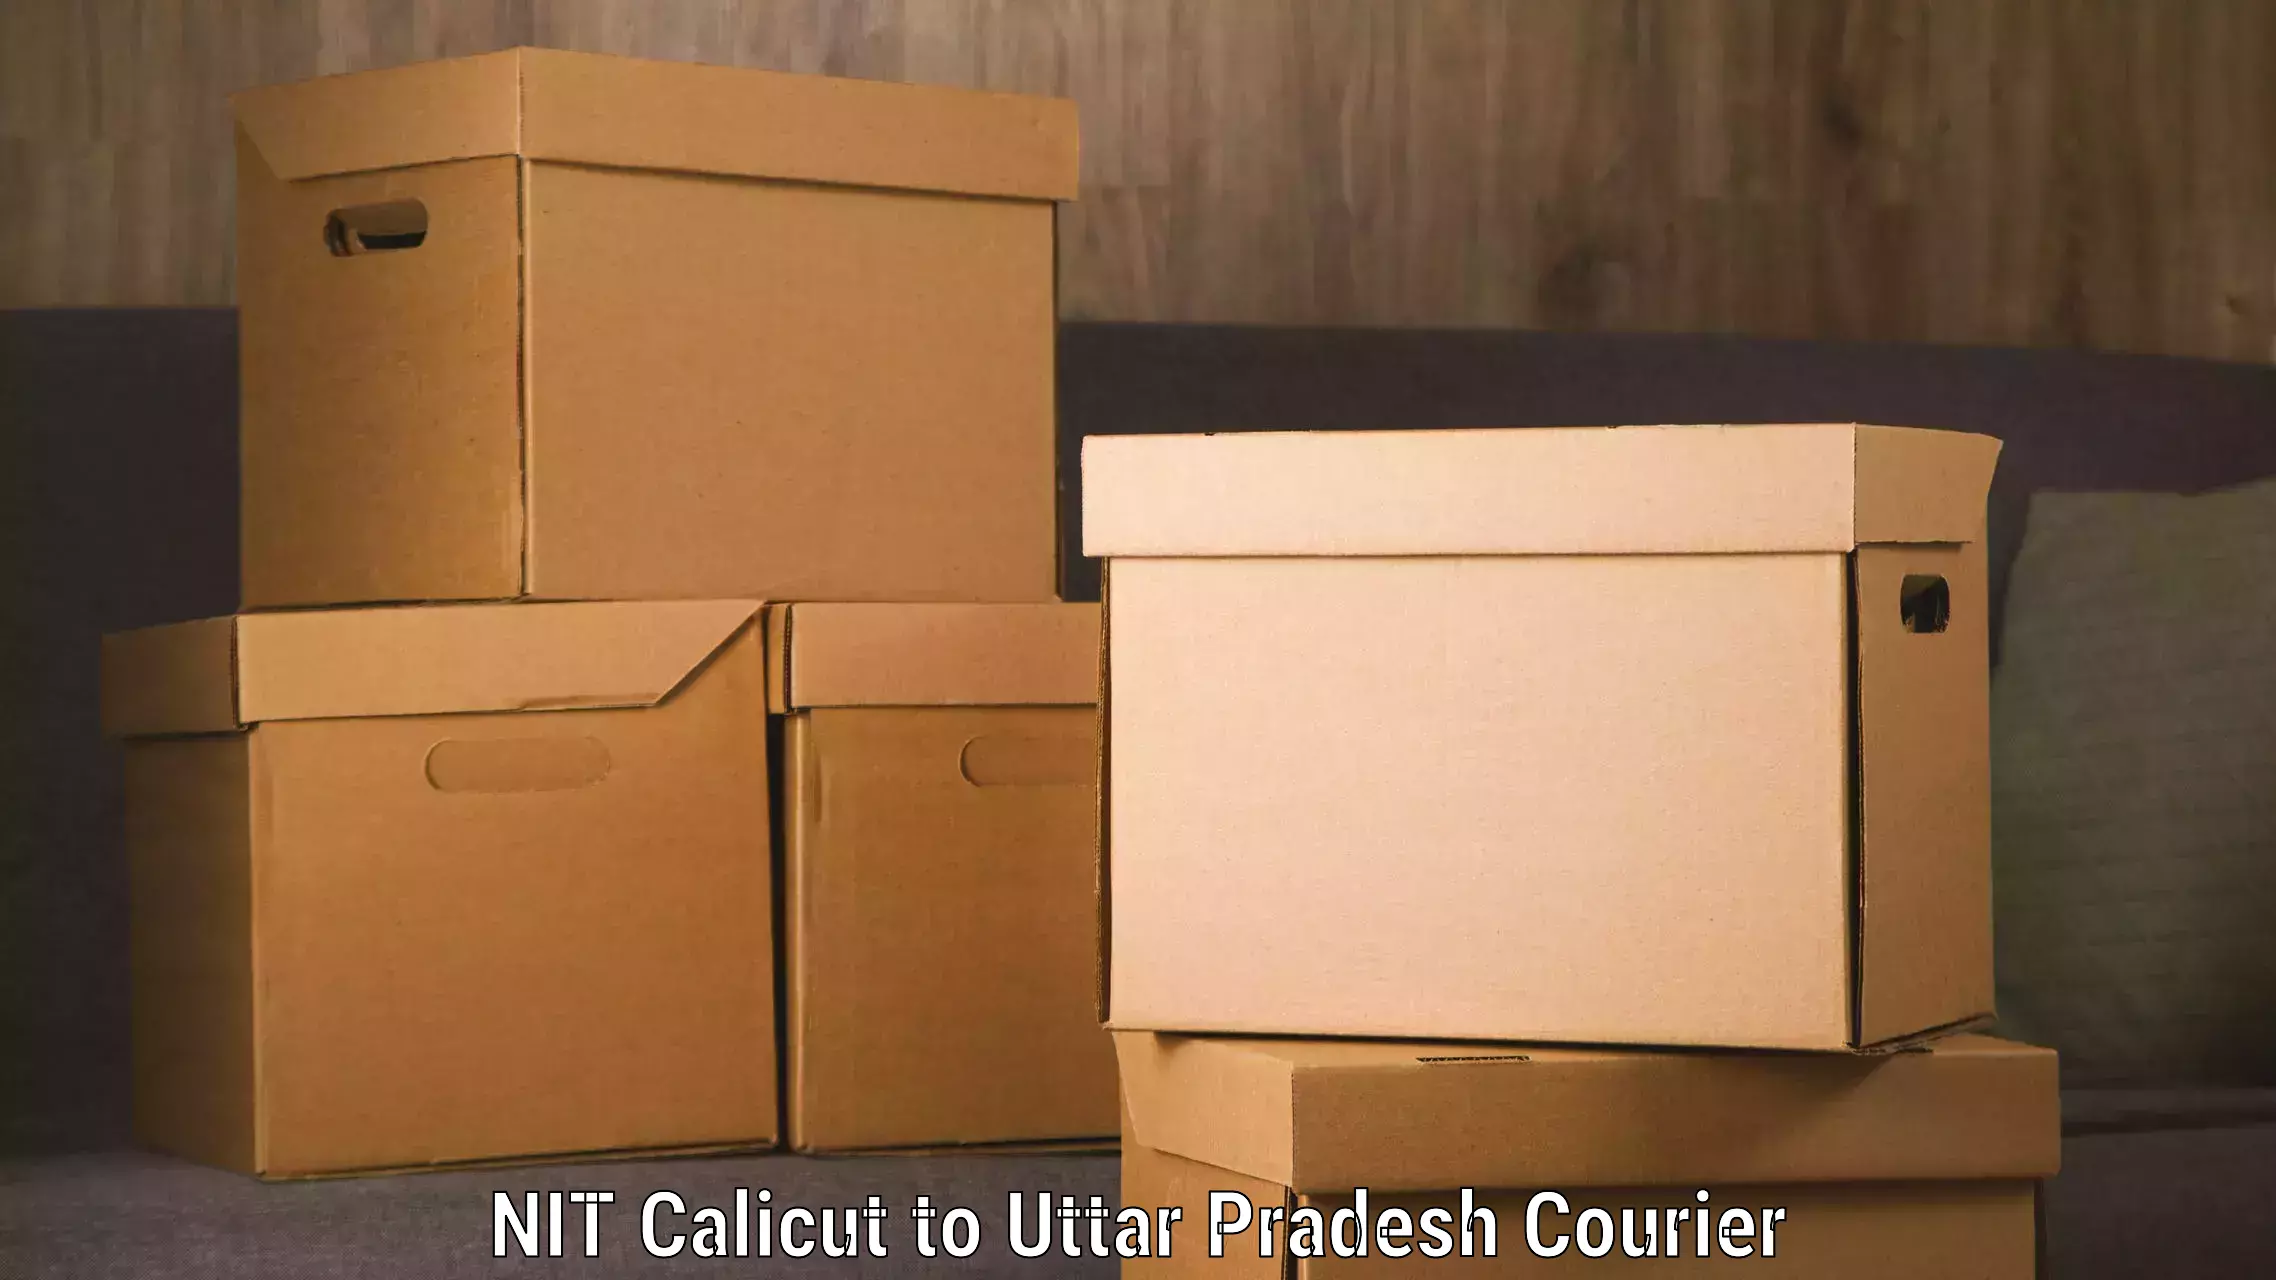 Cash on delivery service NIT Calicut to Bharwari